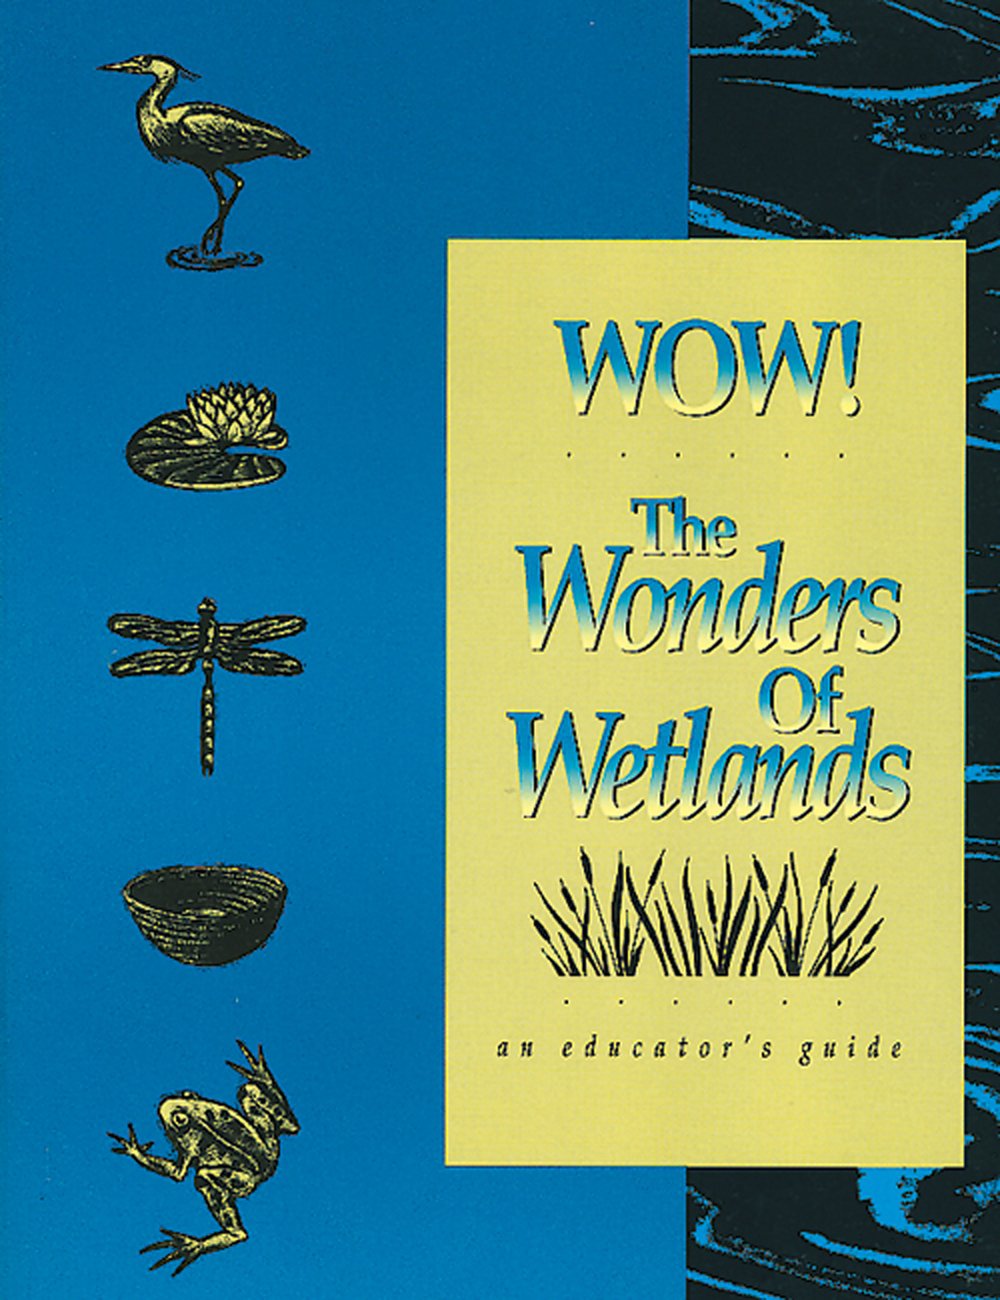 Wow! The Wonders of Wetlands, An Educator's Guide